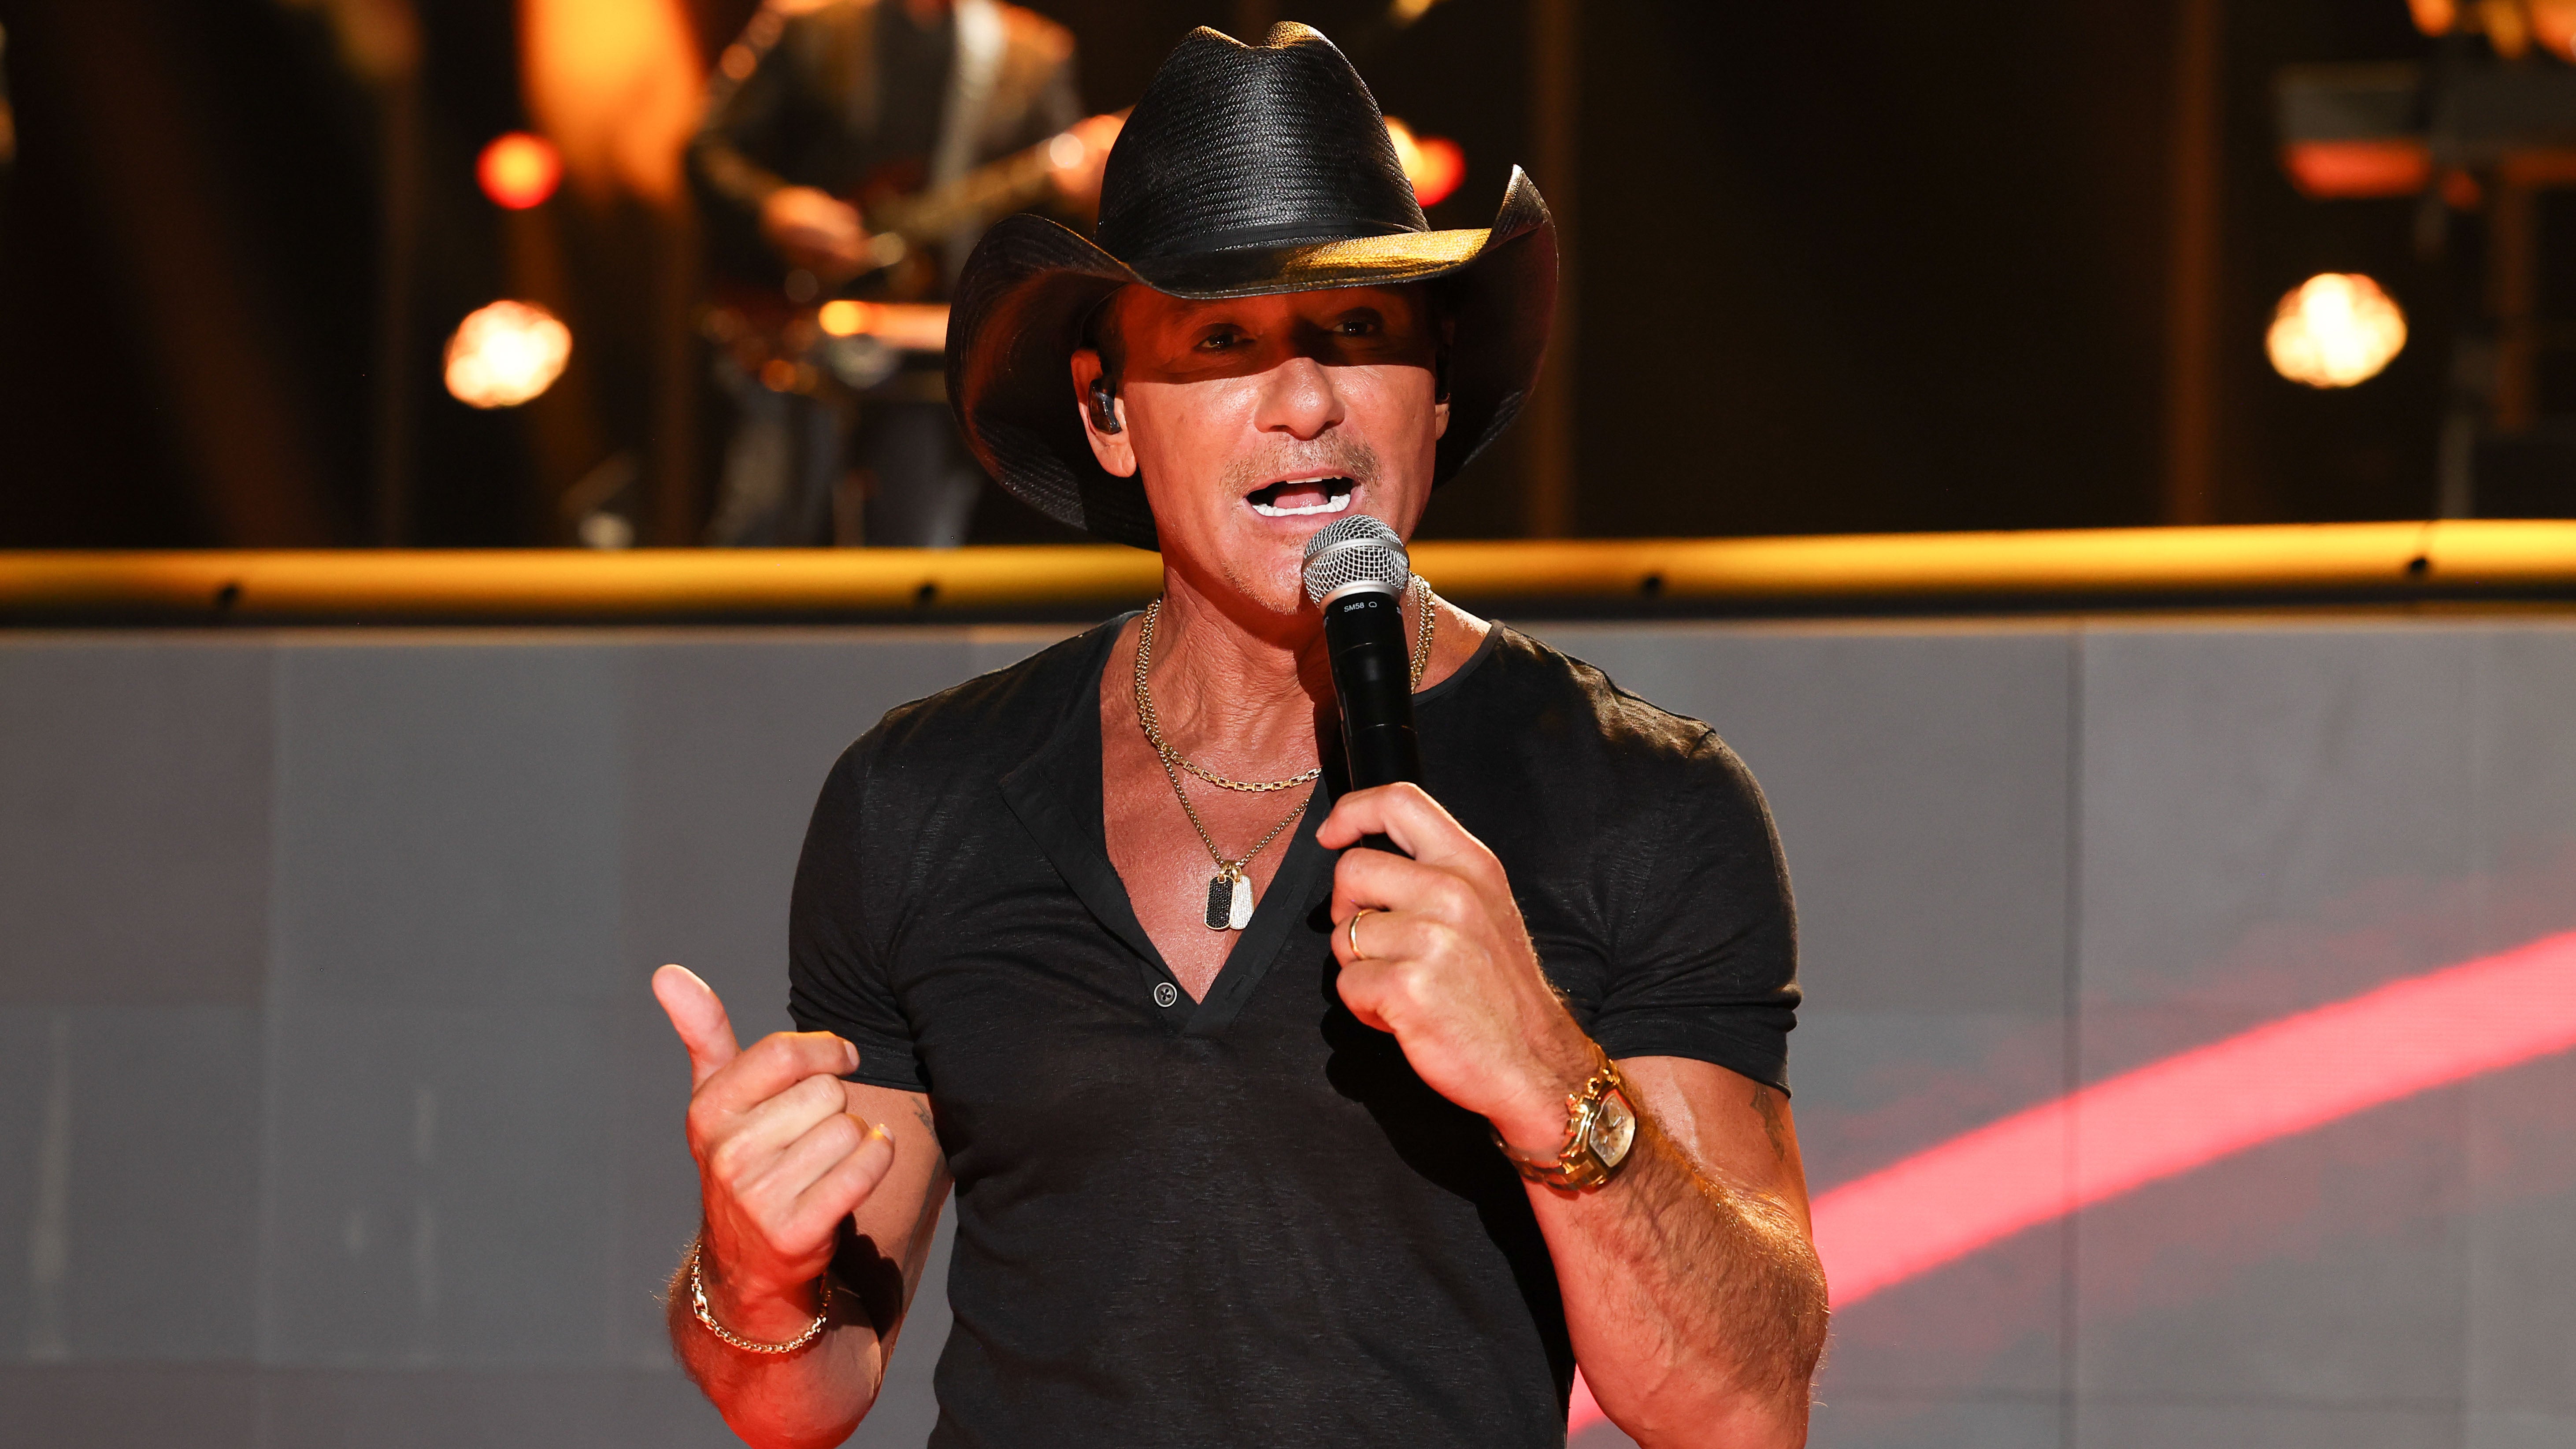 Farce the Music: These Are the Actual Lyrics of Tim McGraw's New Song